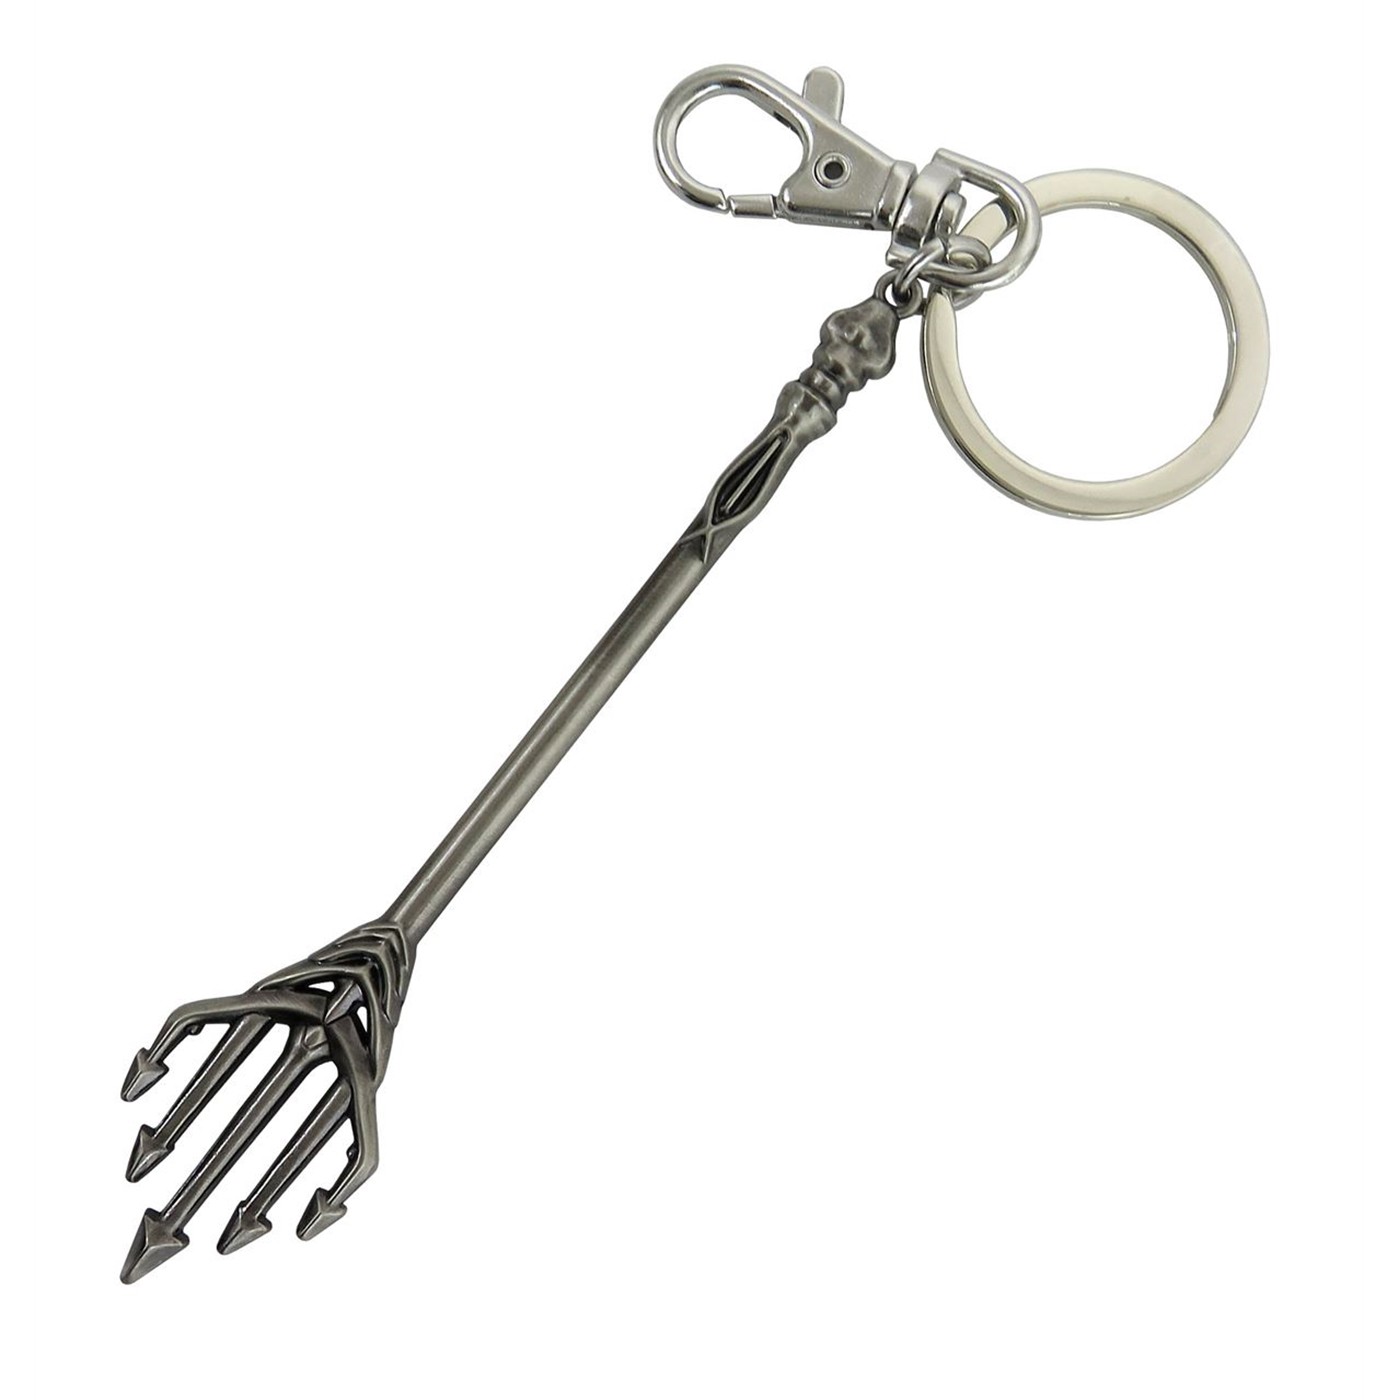 Aquaman Ornament or Necklace Keychain